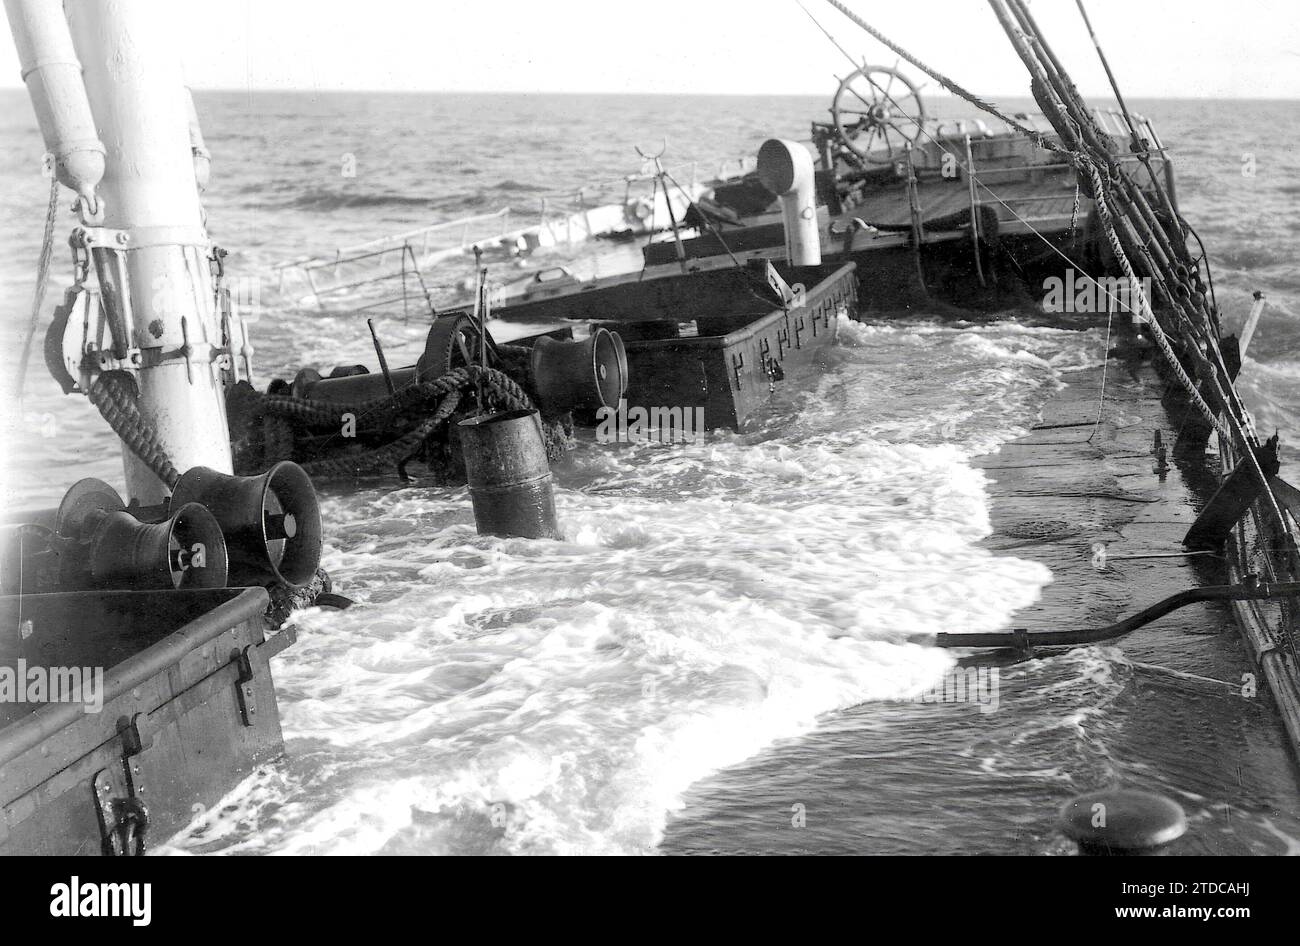 02/05/1911. Wreck of the Steamboat 'Abanto' view of the stern of the ship after the accident in which its crew perished. Credit: Album / Archivo ABC / Vicente Barbera Masip Stock Photo